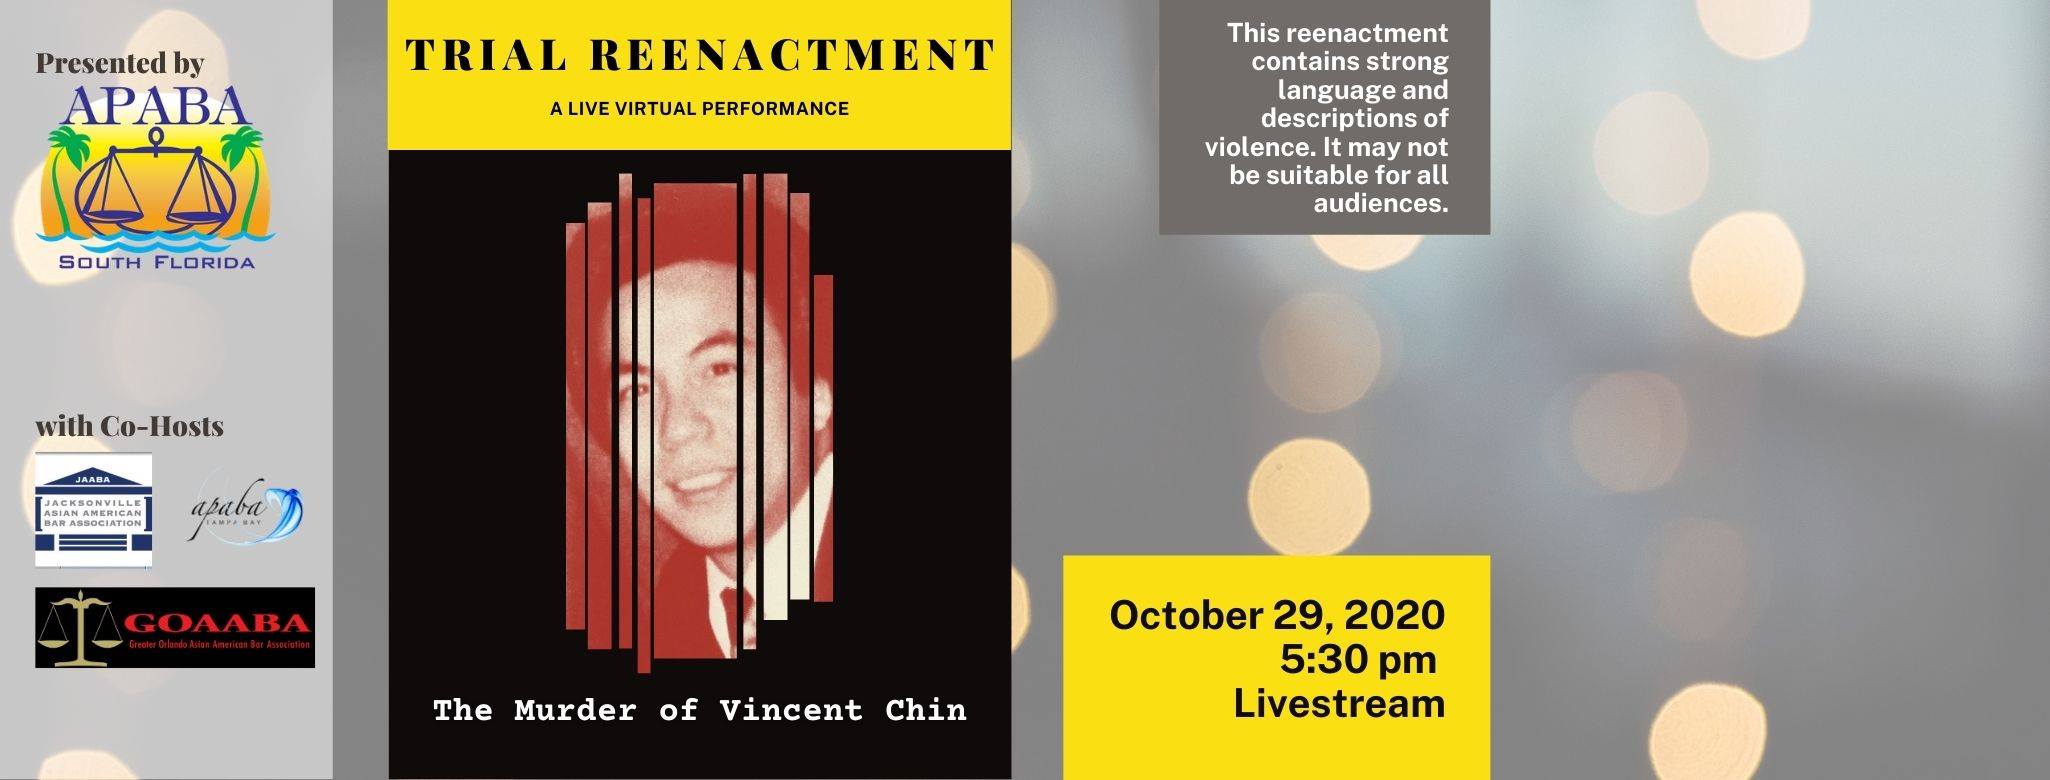 The Murder of Vincent Chin, A Trial Reenactment